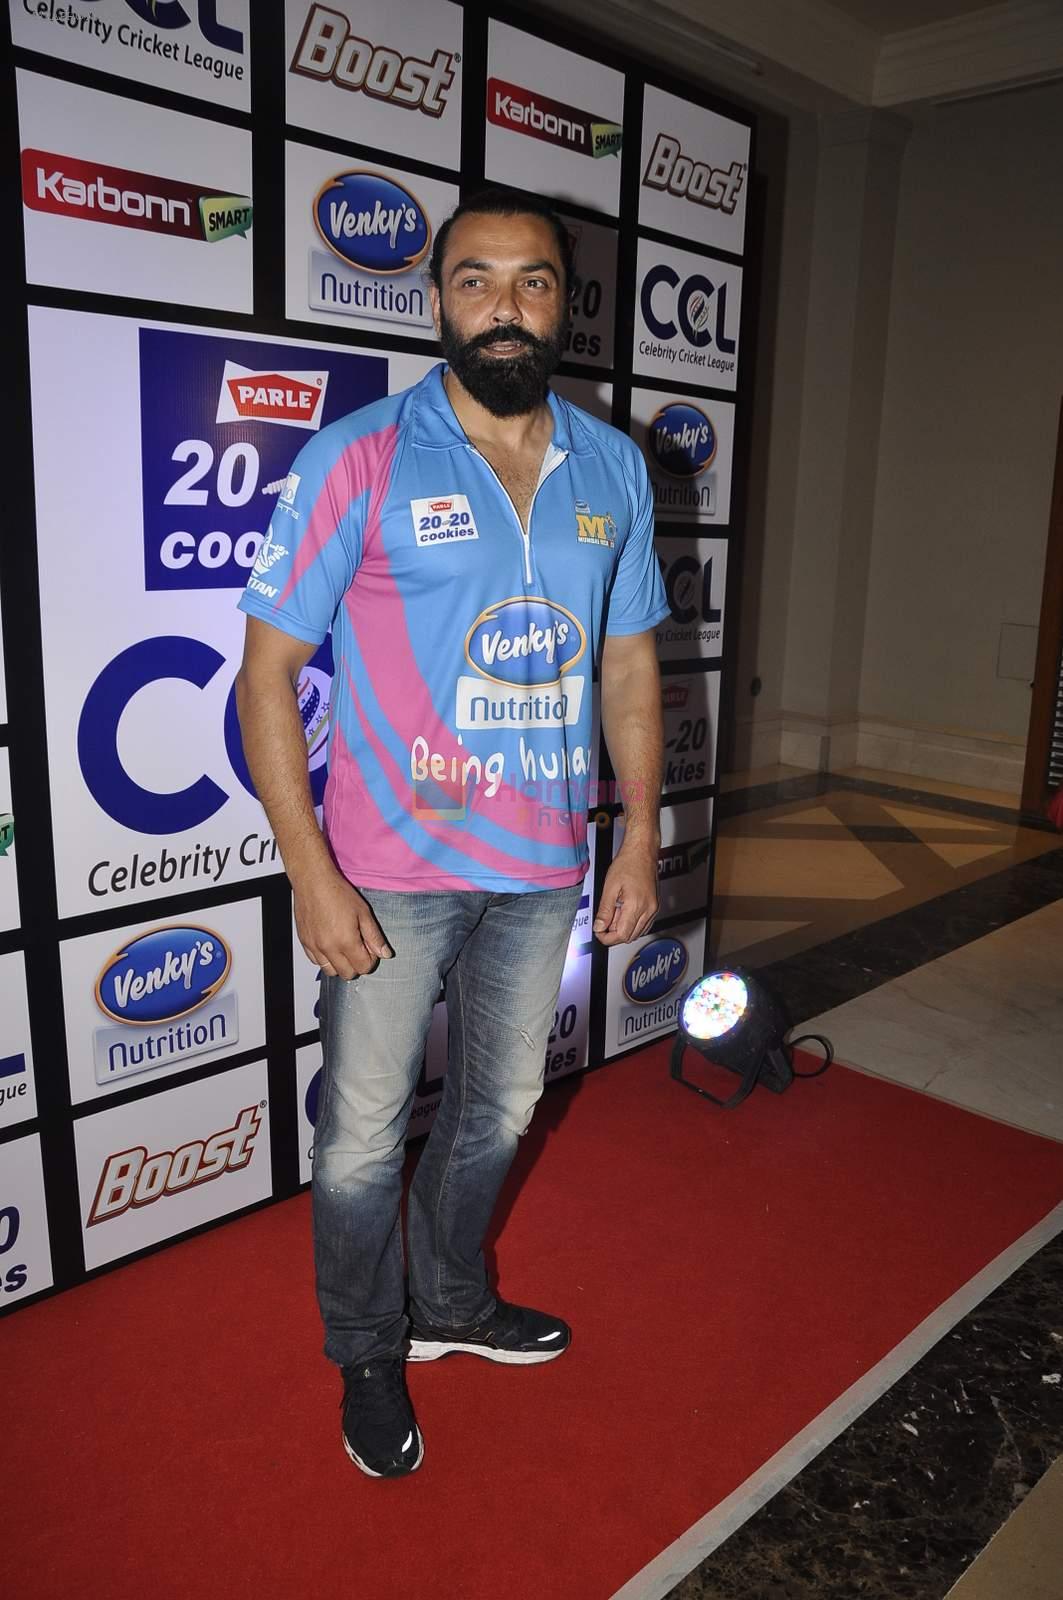 Bobby Deol at CCL 6 launch in Mumbai on 11th Jan 2016